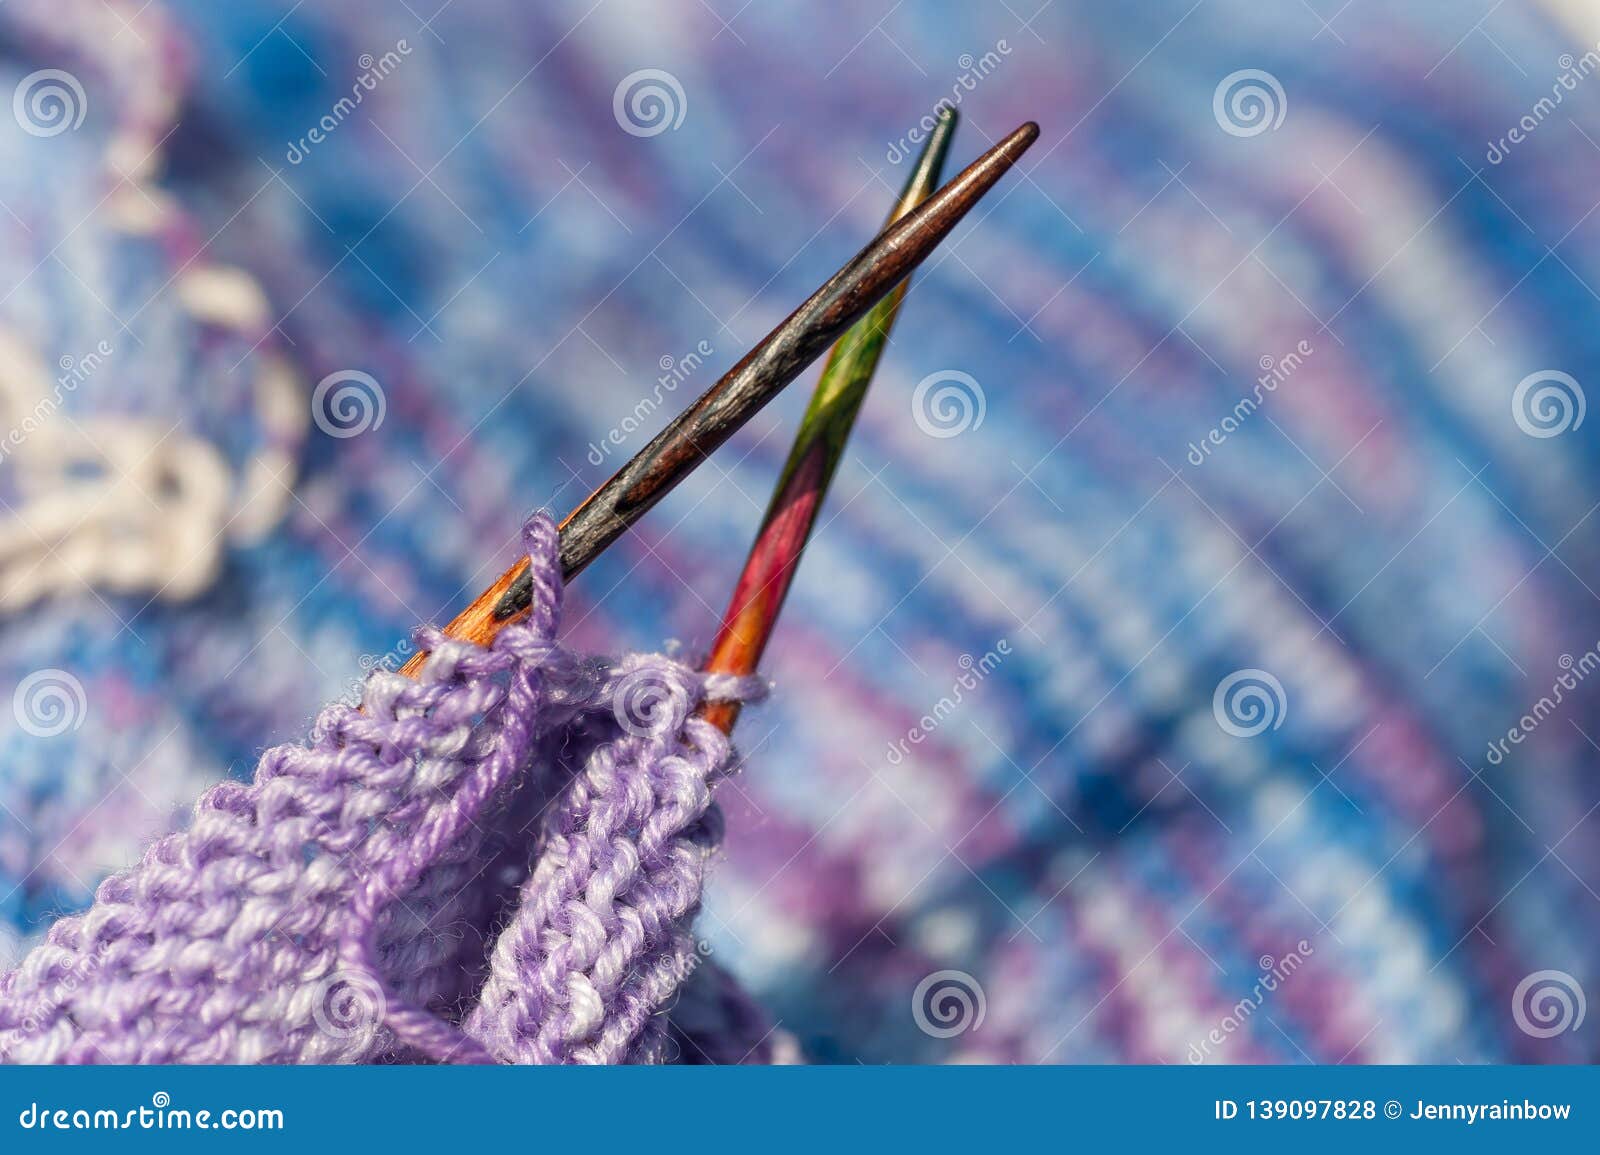 Macro of Knitting Needles with Pale Purple Yarn in Process of Knitting ...